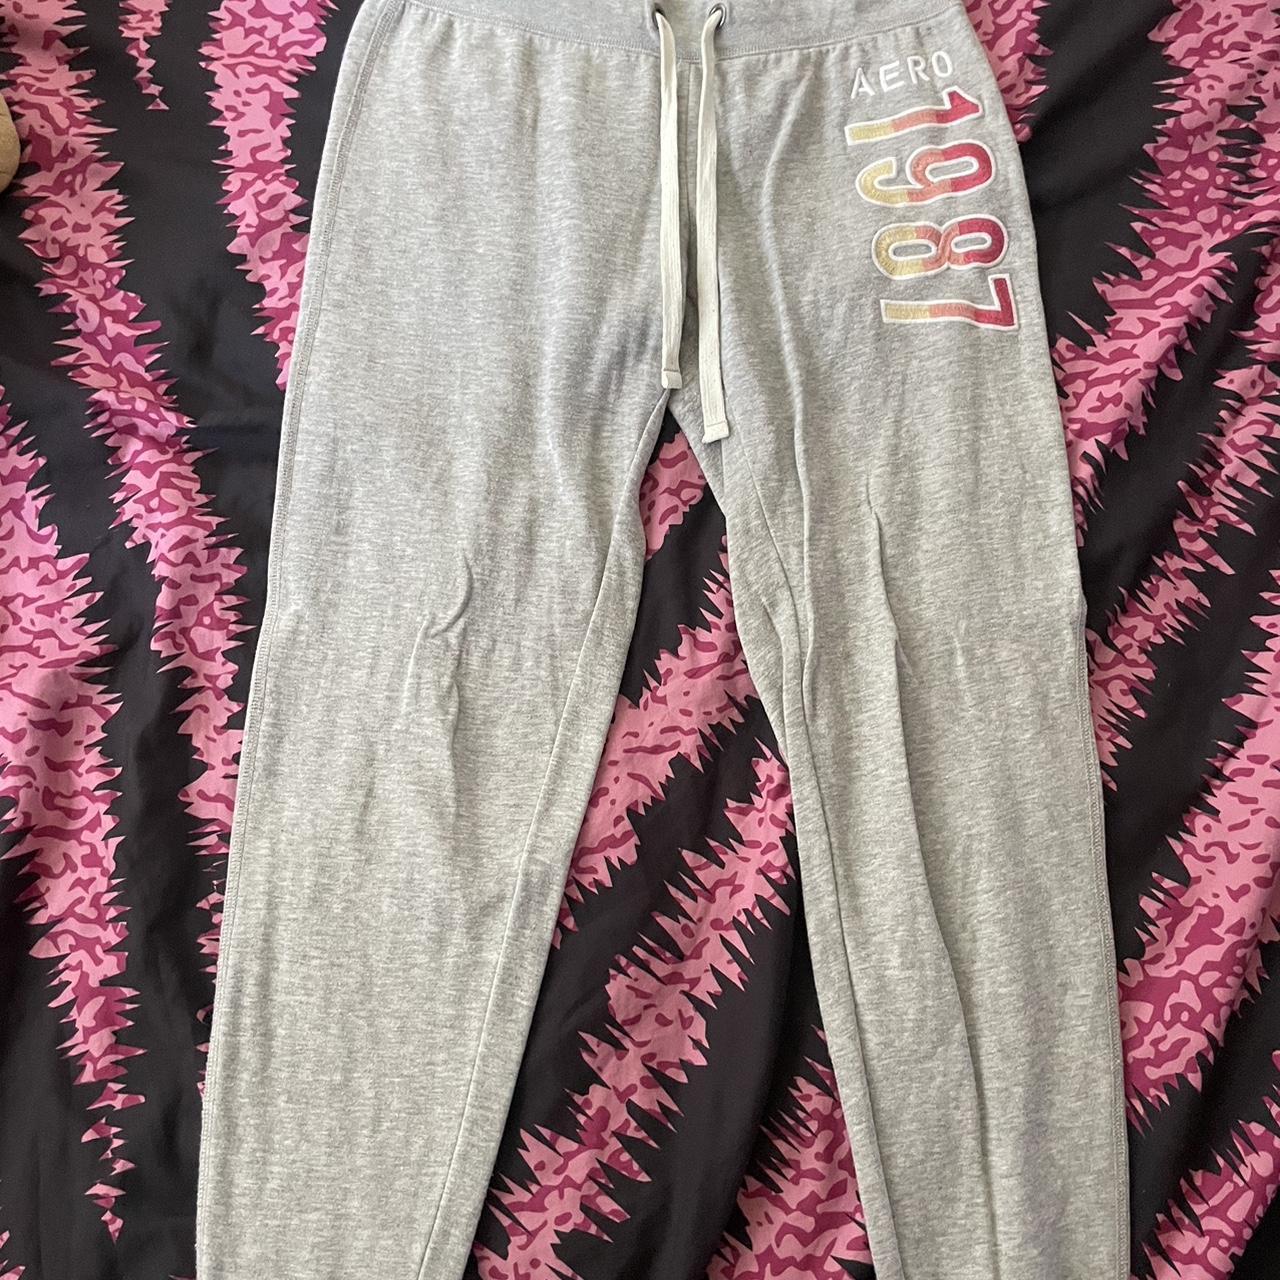 Aggregate more than 137 aeropostale sweat suits womens best